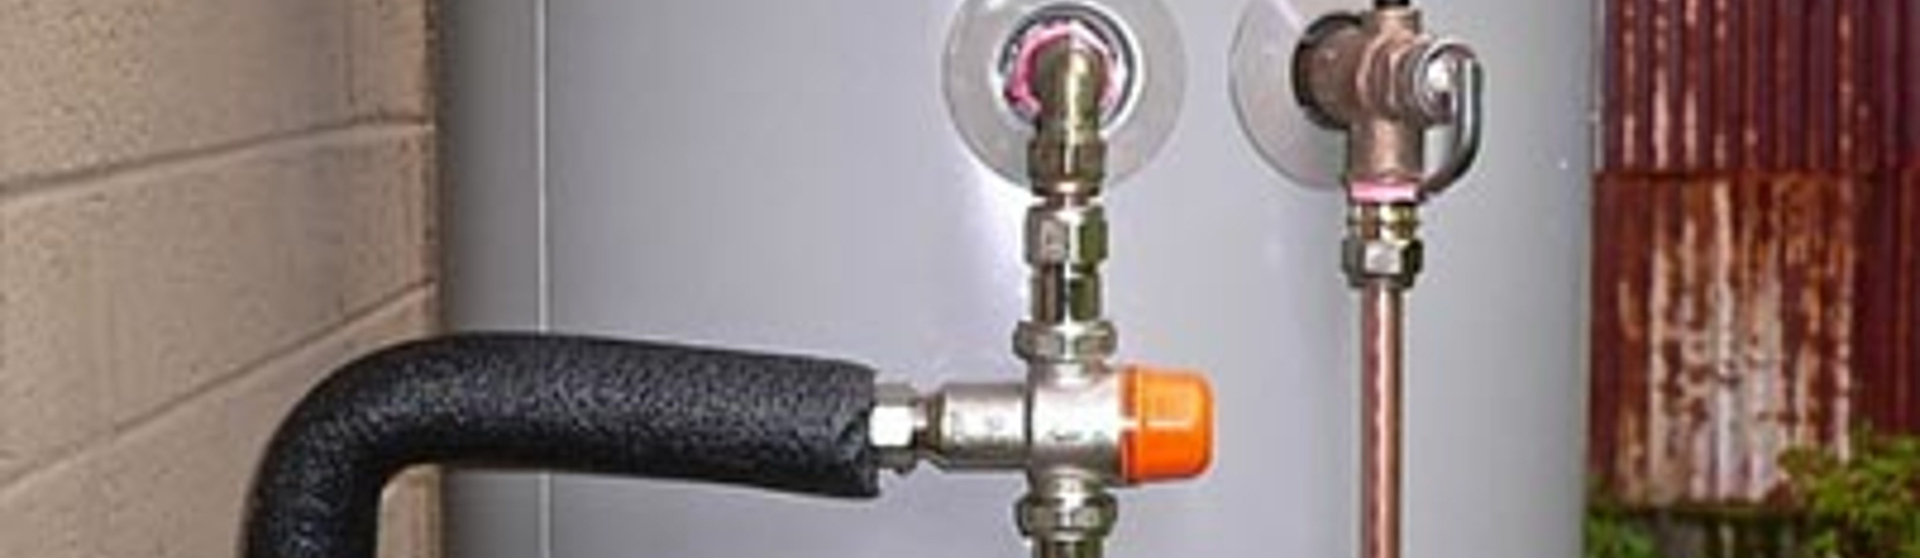 Backflow Valves, Tempering Valves and Thermostatic Mixing Valves